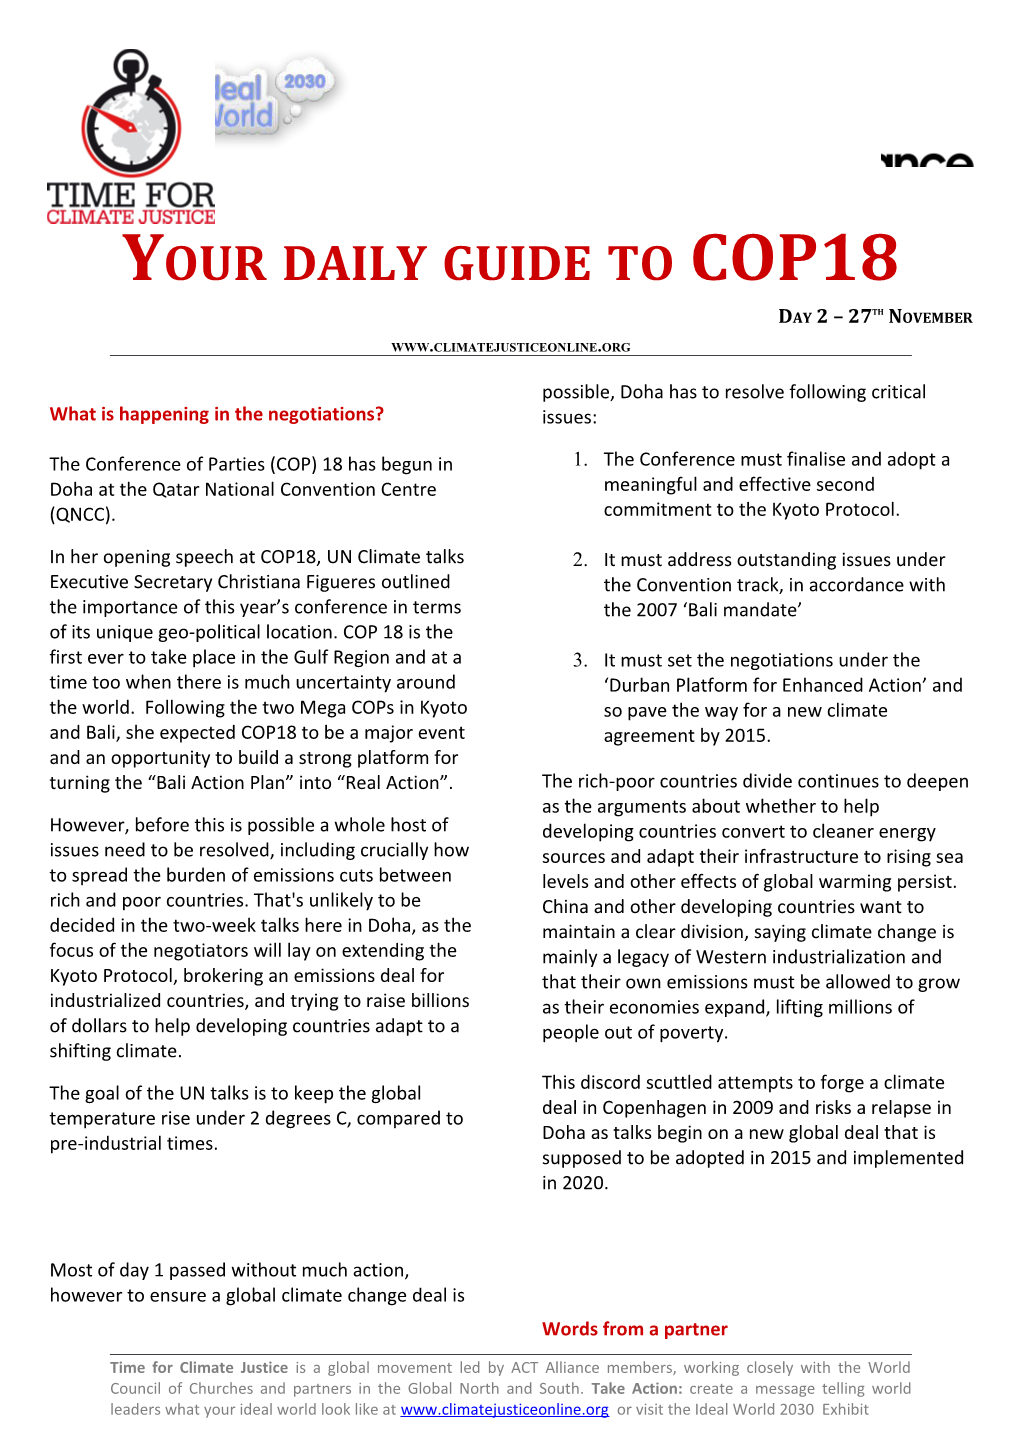 Your Daily Guide to COP18